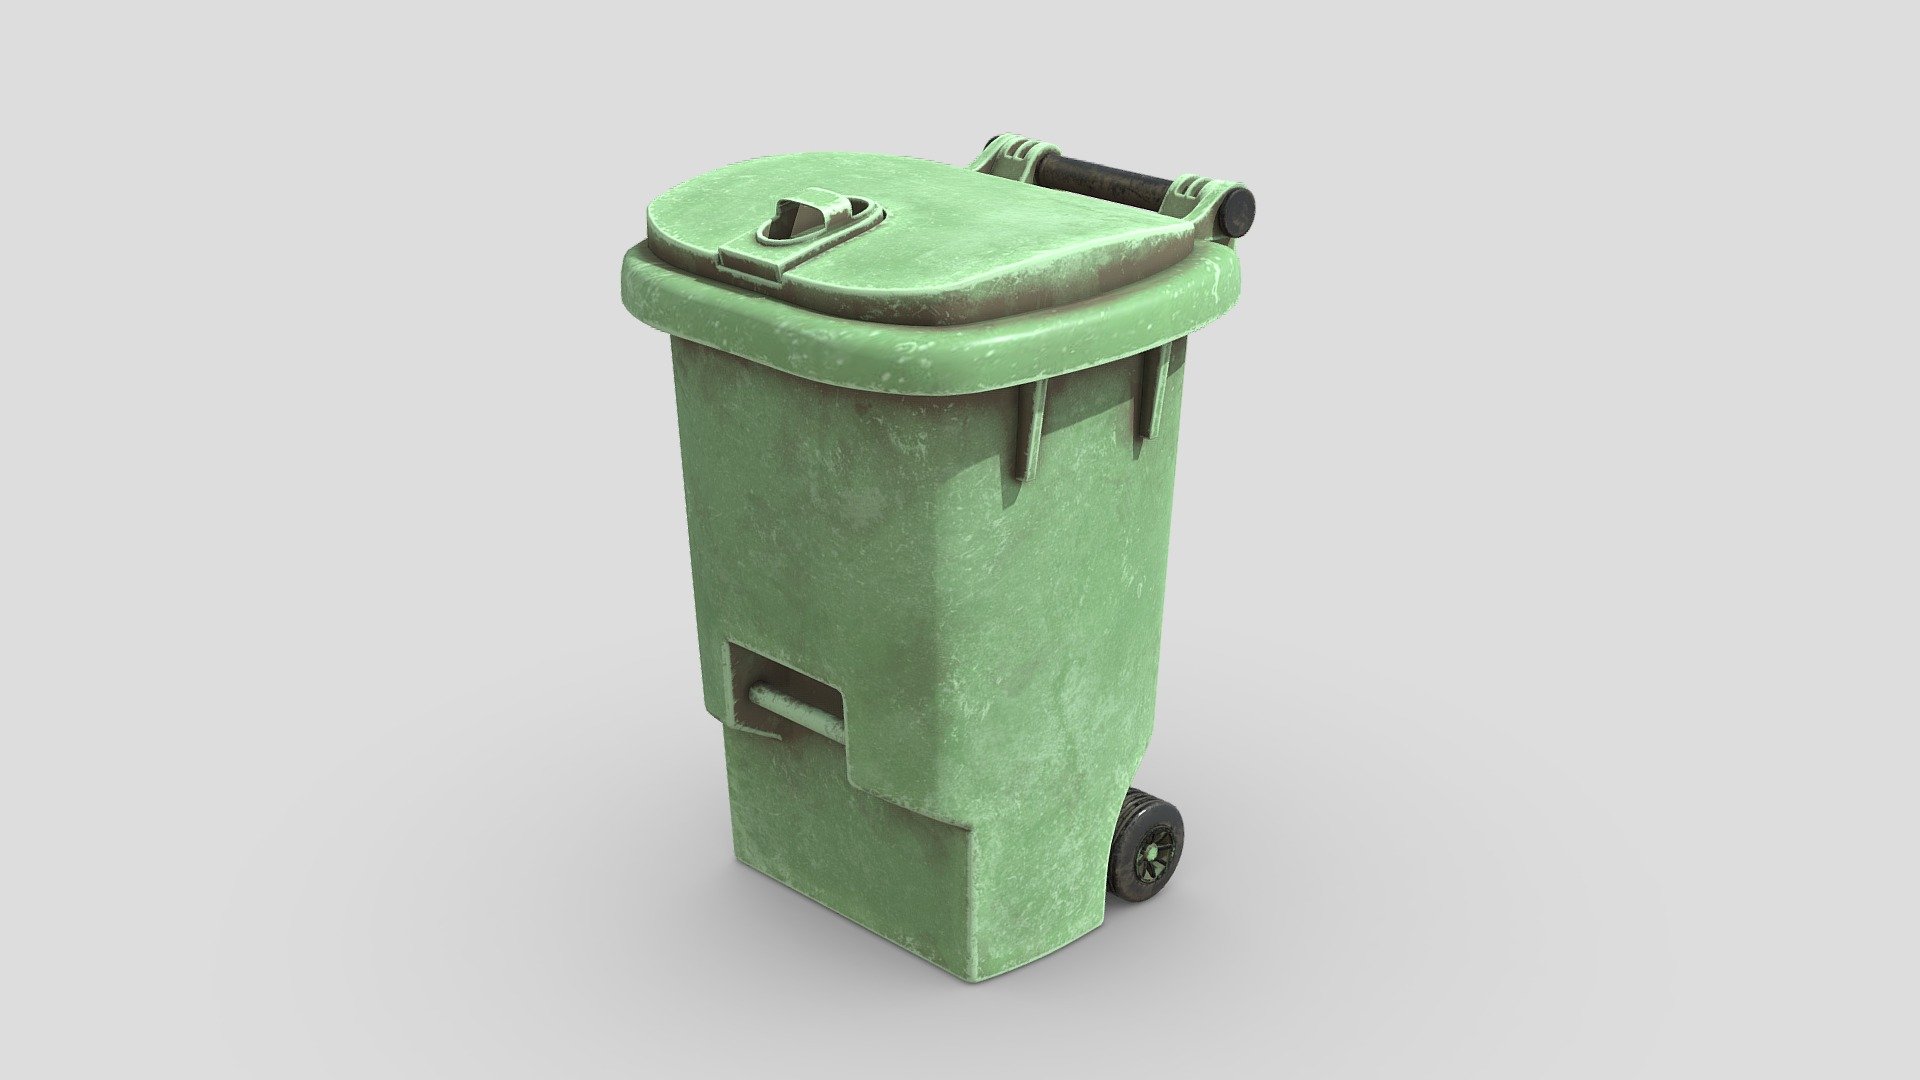 High poly 3d model of waste bin with dirty textures, nice topology and surface flow. Perfect for every kind of projects 3d model